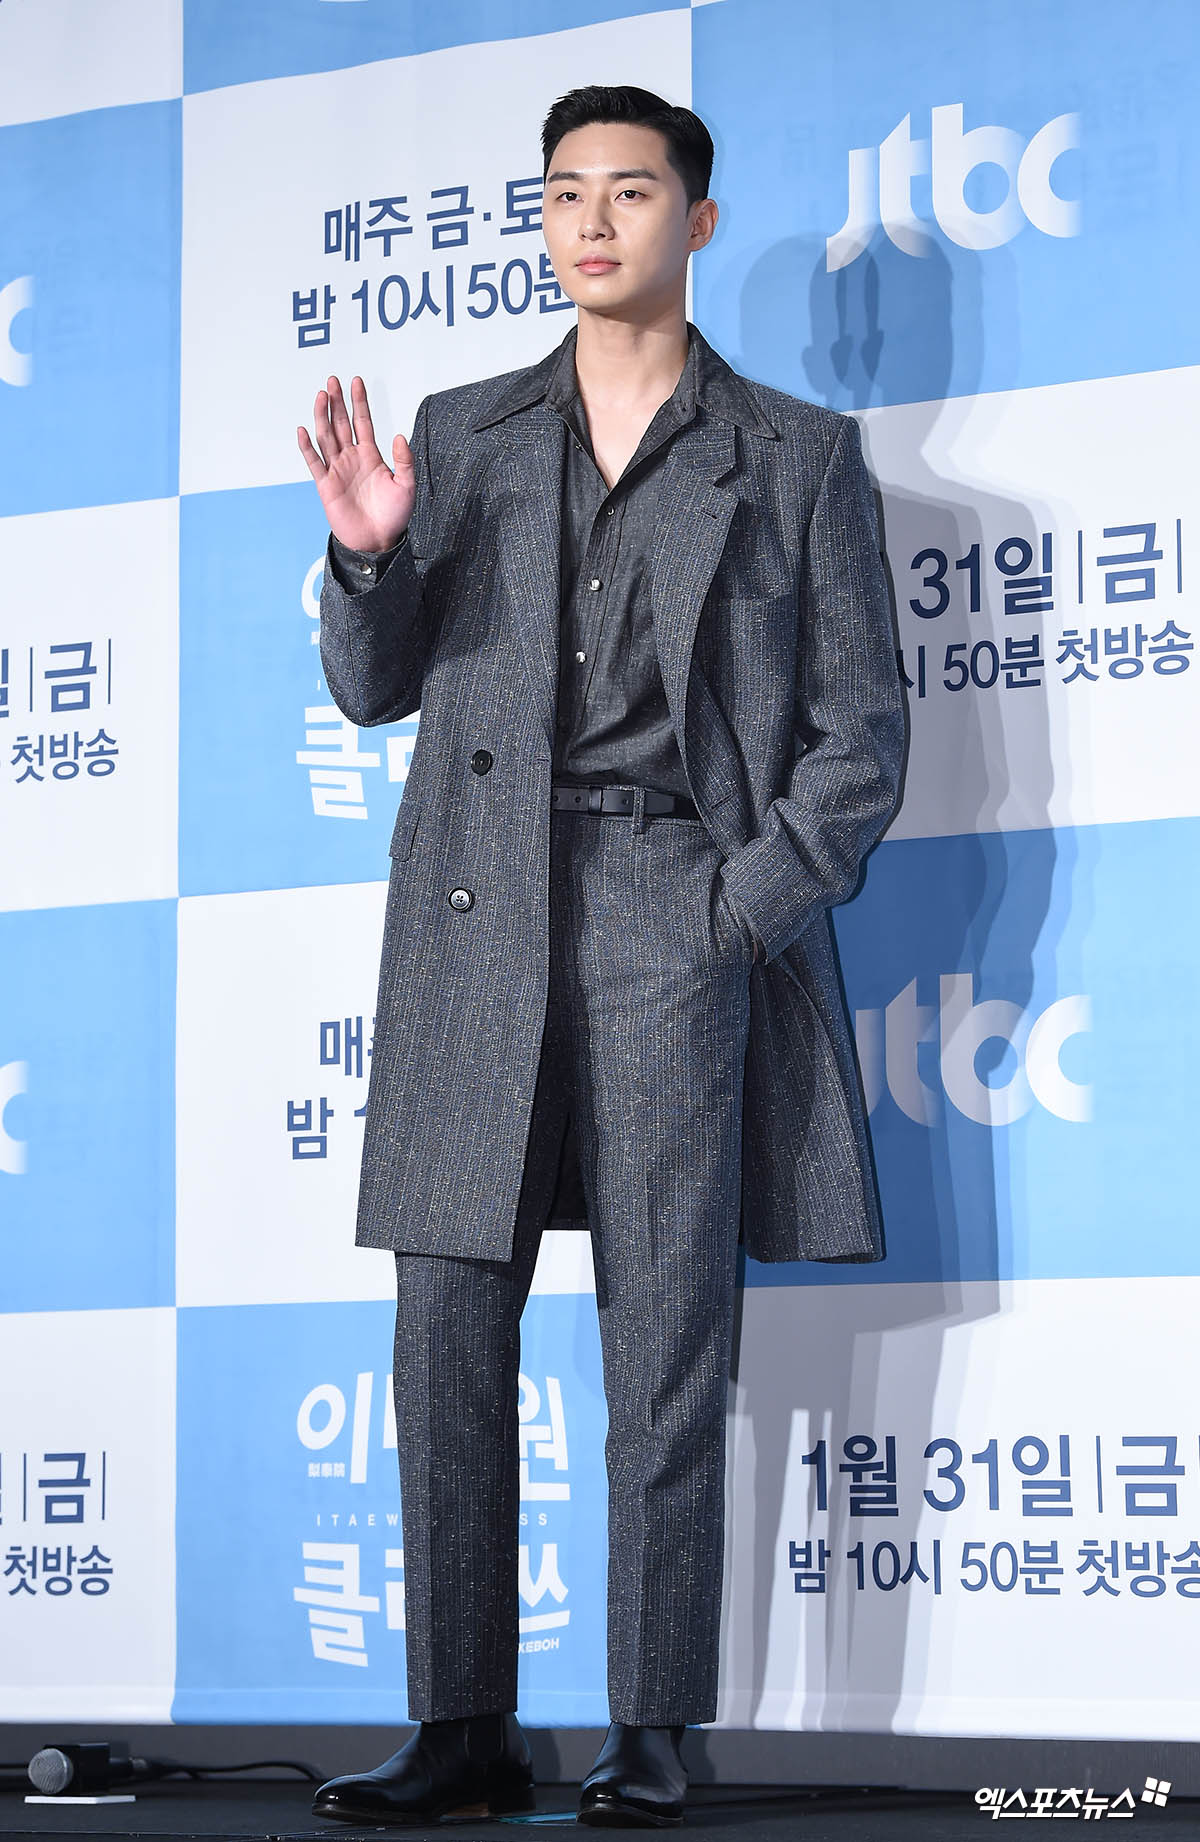 Actor Park Seo-joon, who attended the JTBC gilt drama Itaewon Klath production presentation at Seoul Yeouido-dong Conrad Seoul on the afternoon of the 20th, has photo time.